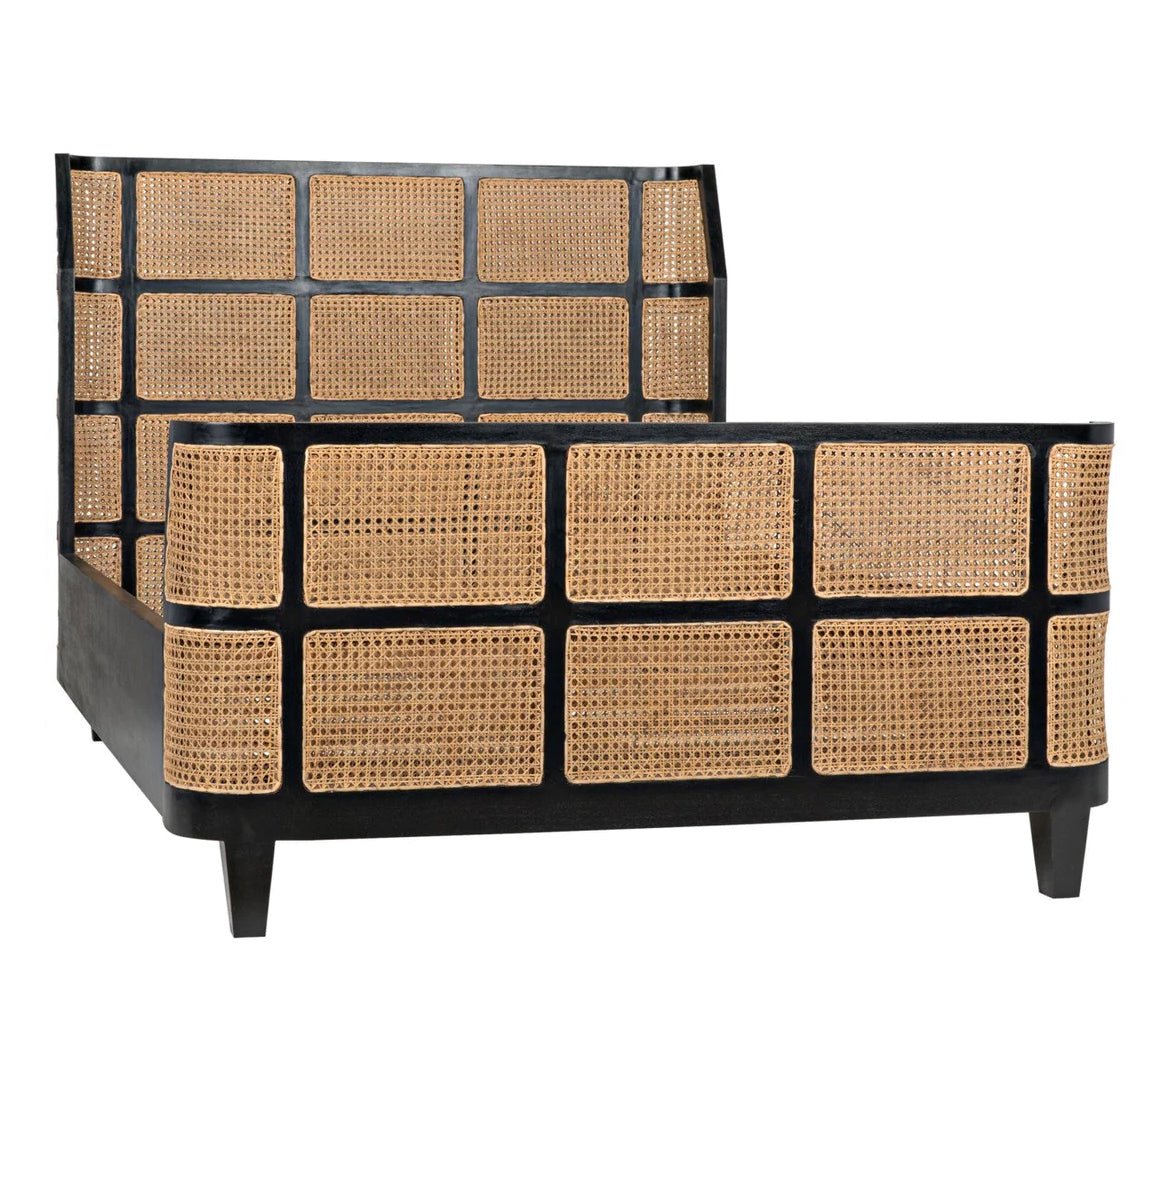 ‘Porto’ Caned Queen Bed (Hand Rubbed Black - EcoLuxe Furnishings